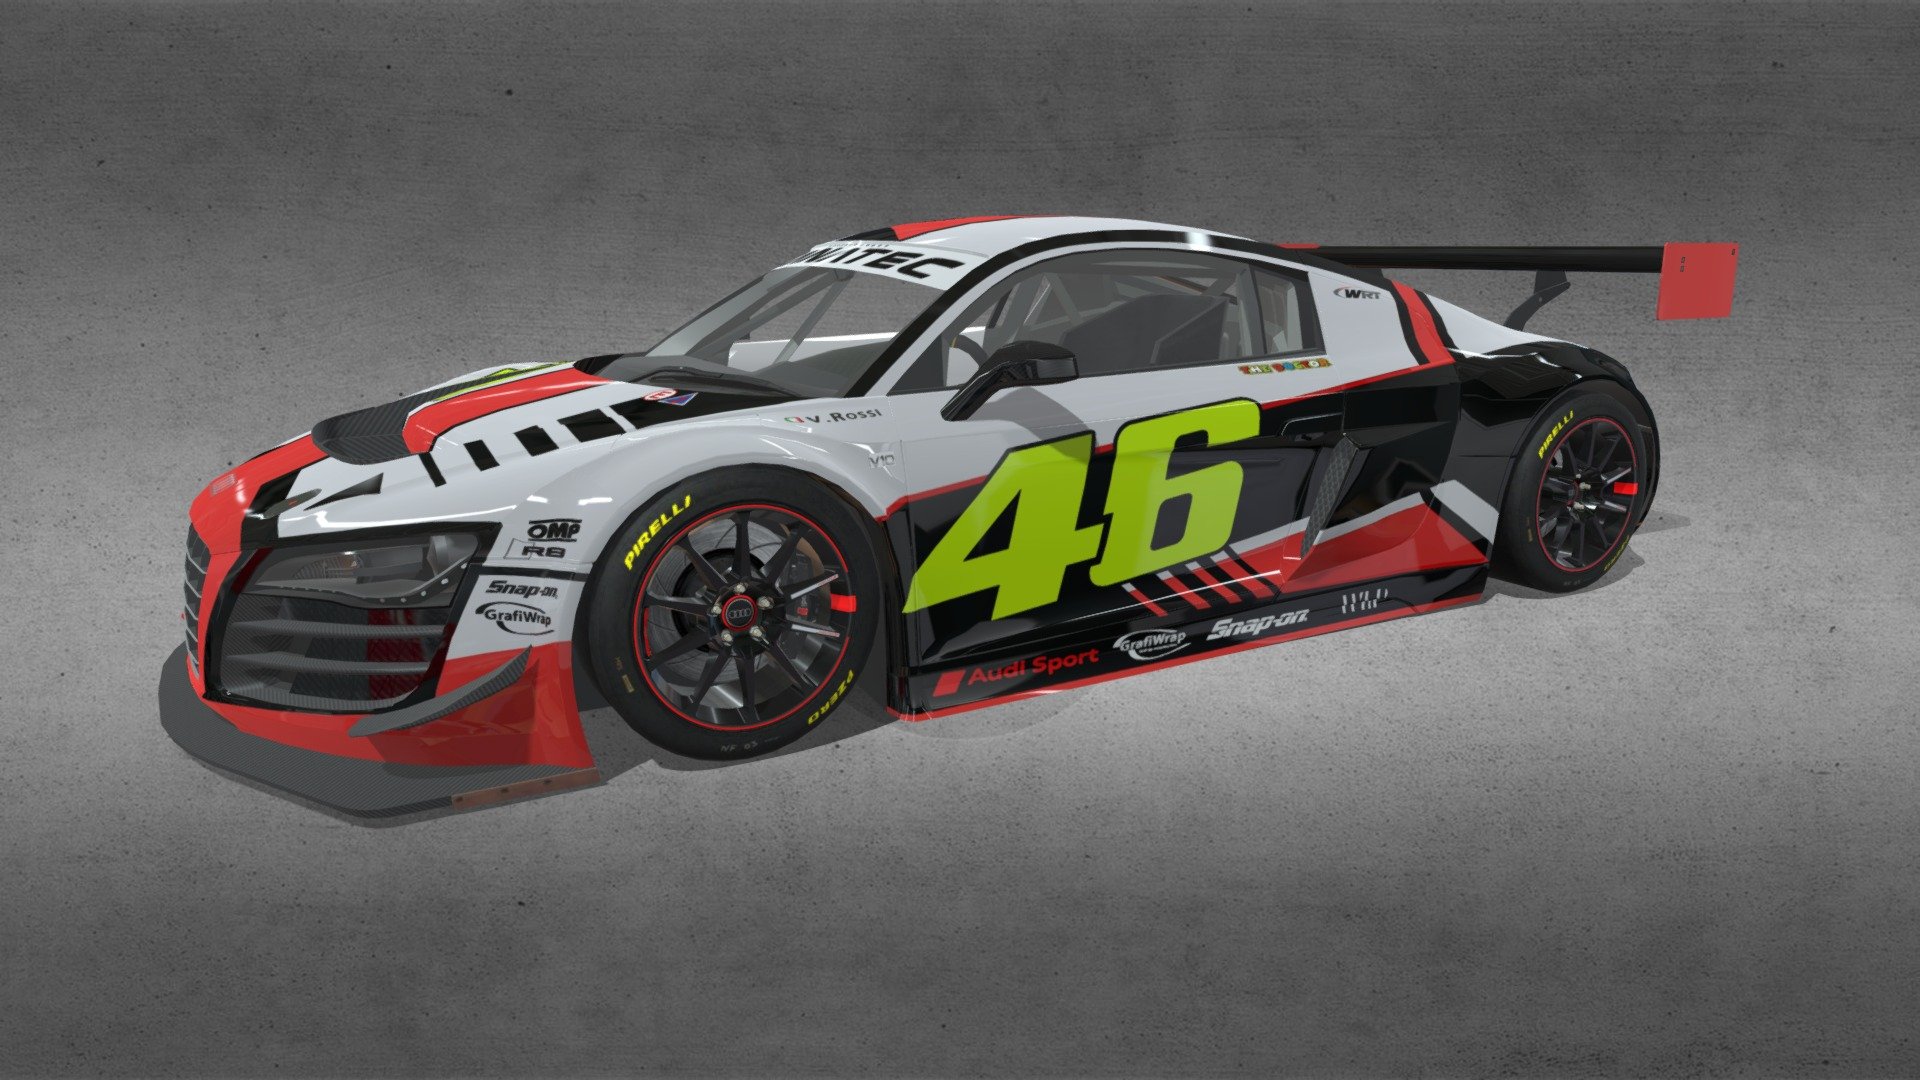 Low poly model Audi R8 LMS GT3 Valentino Rossi with team WRT wrap - Audi R8 Valentino Rossi team WRT - 3D model by All-Wide (@dsm350) 3d model